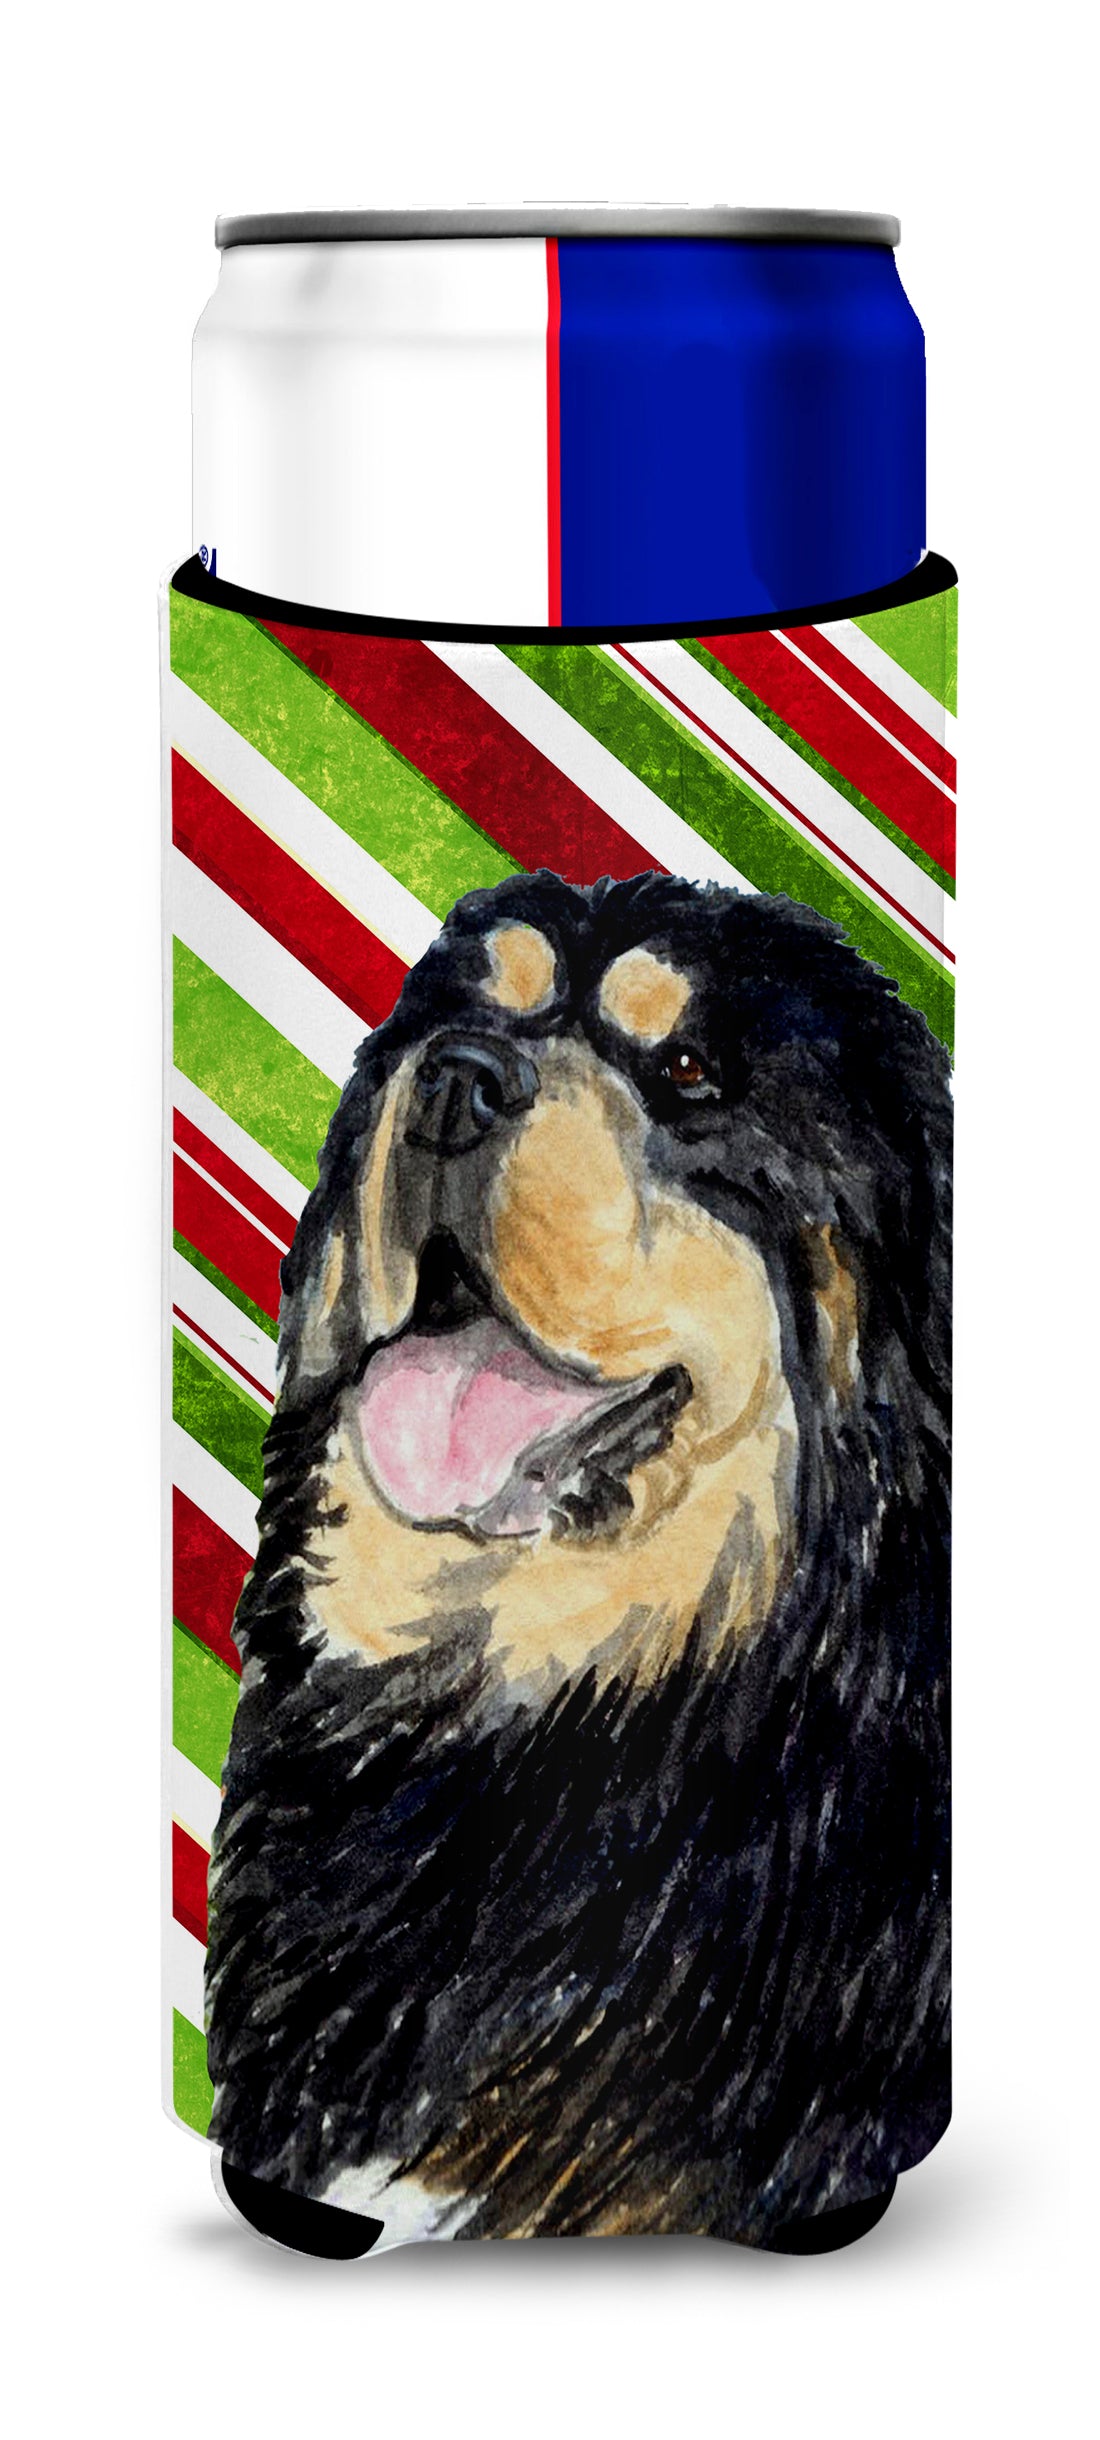 Tibetan Mastiff Candy Cane Holiday Christmas Ultra Beverage Insulators for slim cans SS4581MUK.